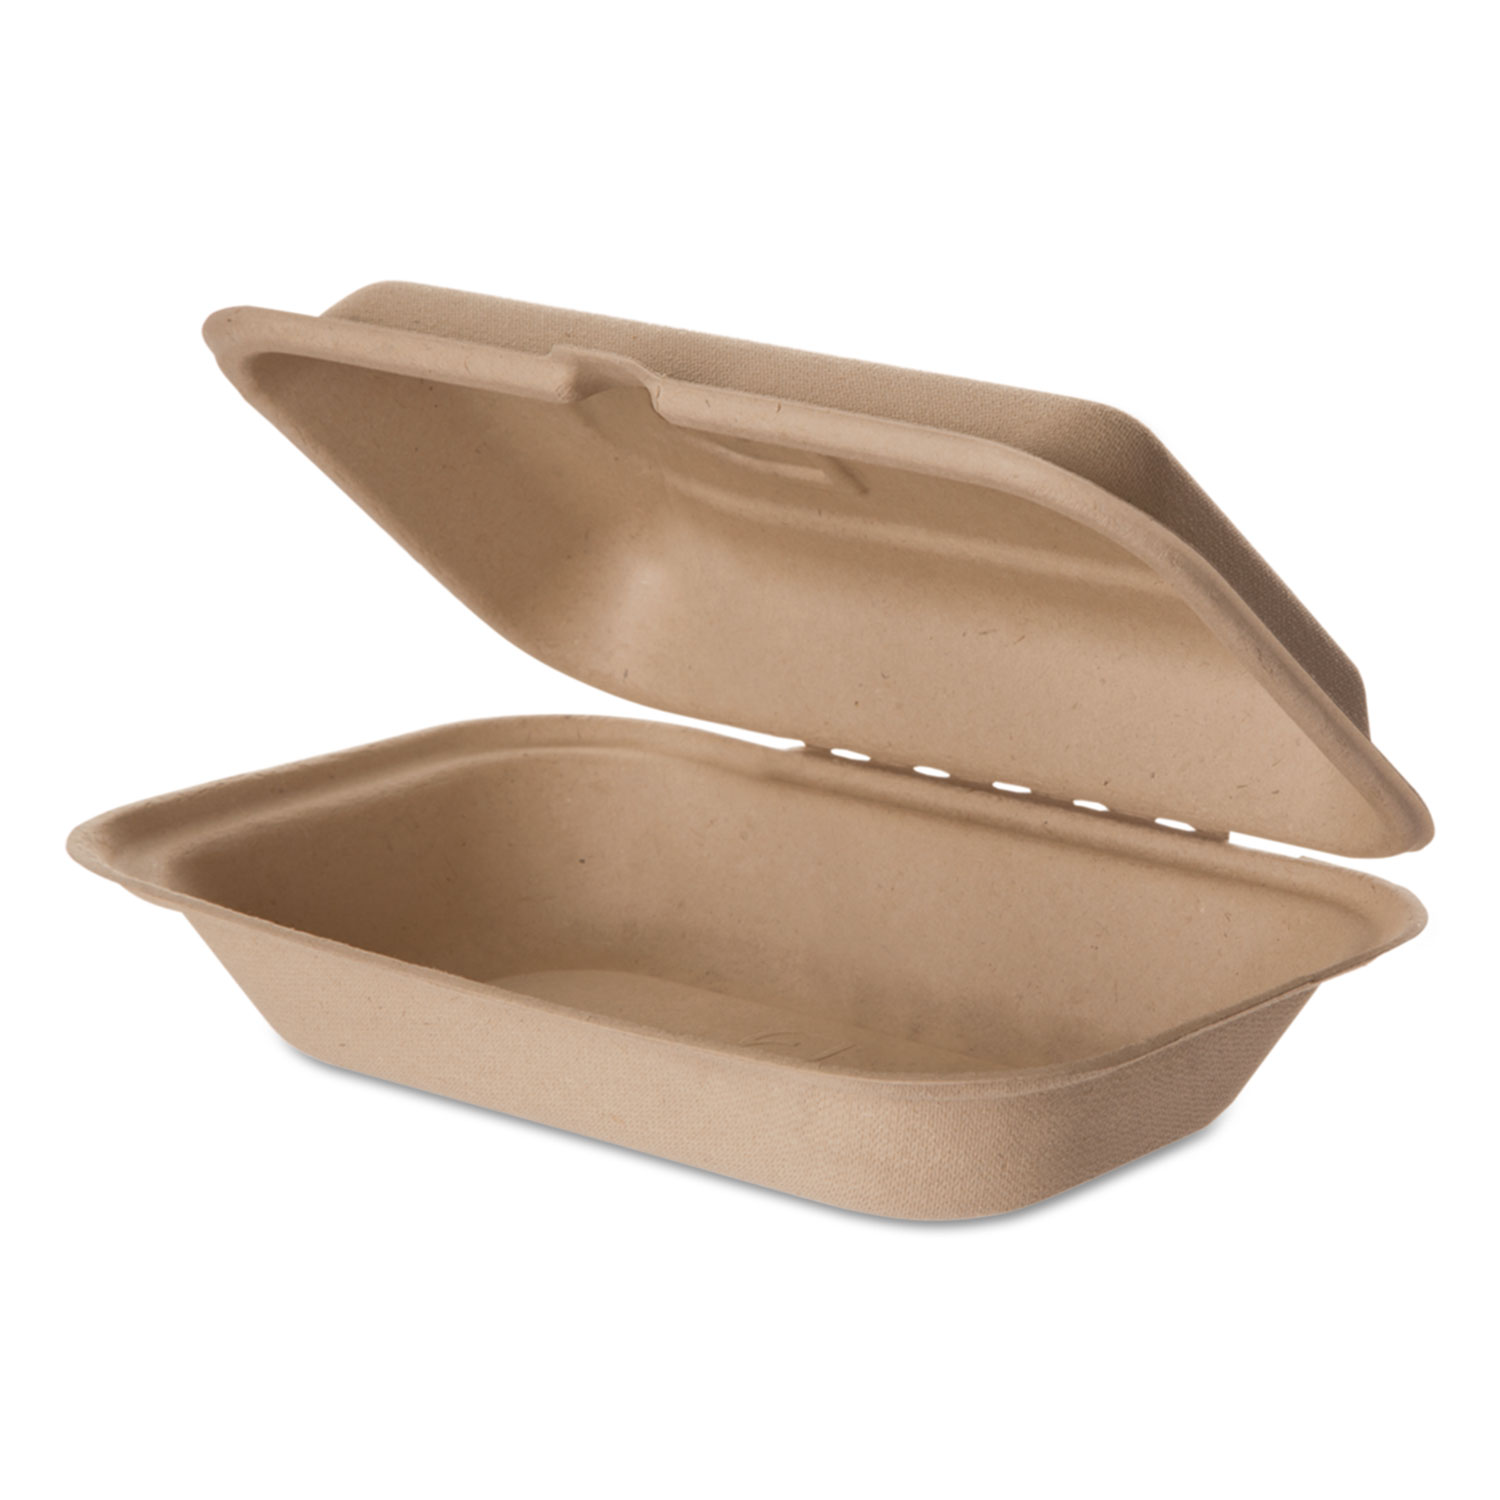  Eco-Products EP-HCW96 Wheat Straw Hinged Clamshell Containers, 6 x 9 x 3, 300/Carton (ECOEPHCW96) 